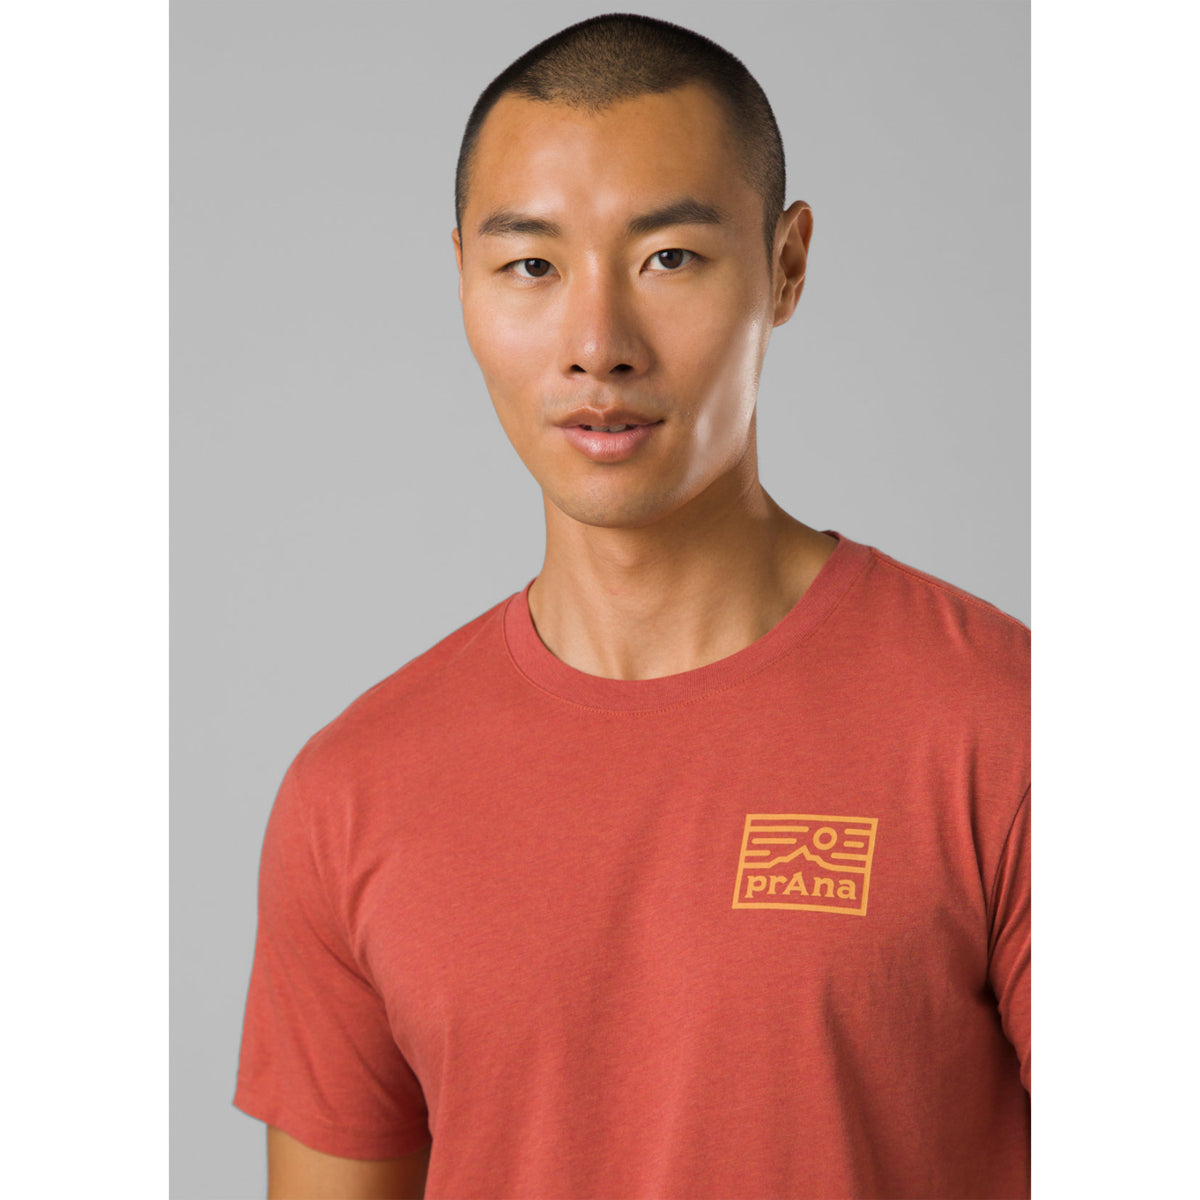 Prana Graphic Short Sleeve T-Shirt in rust heather colour